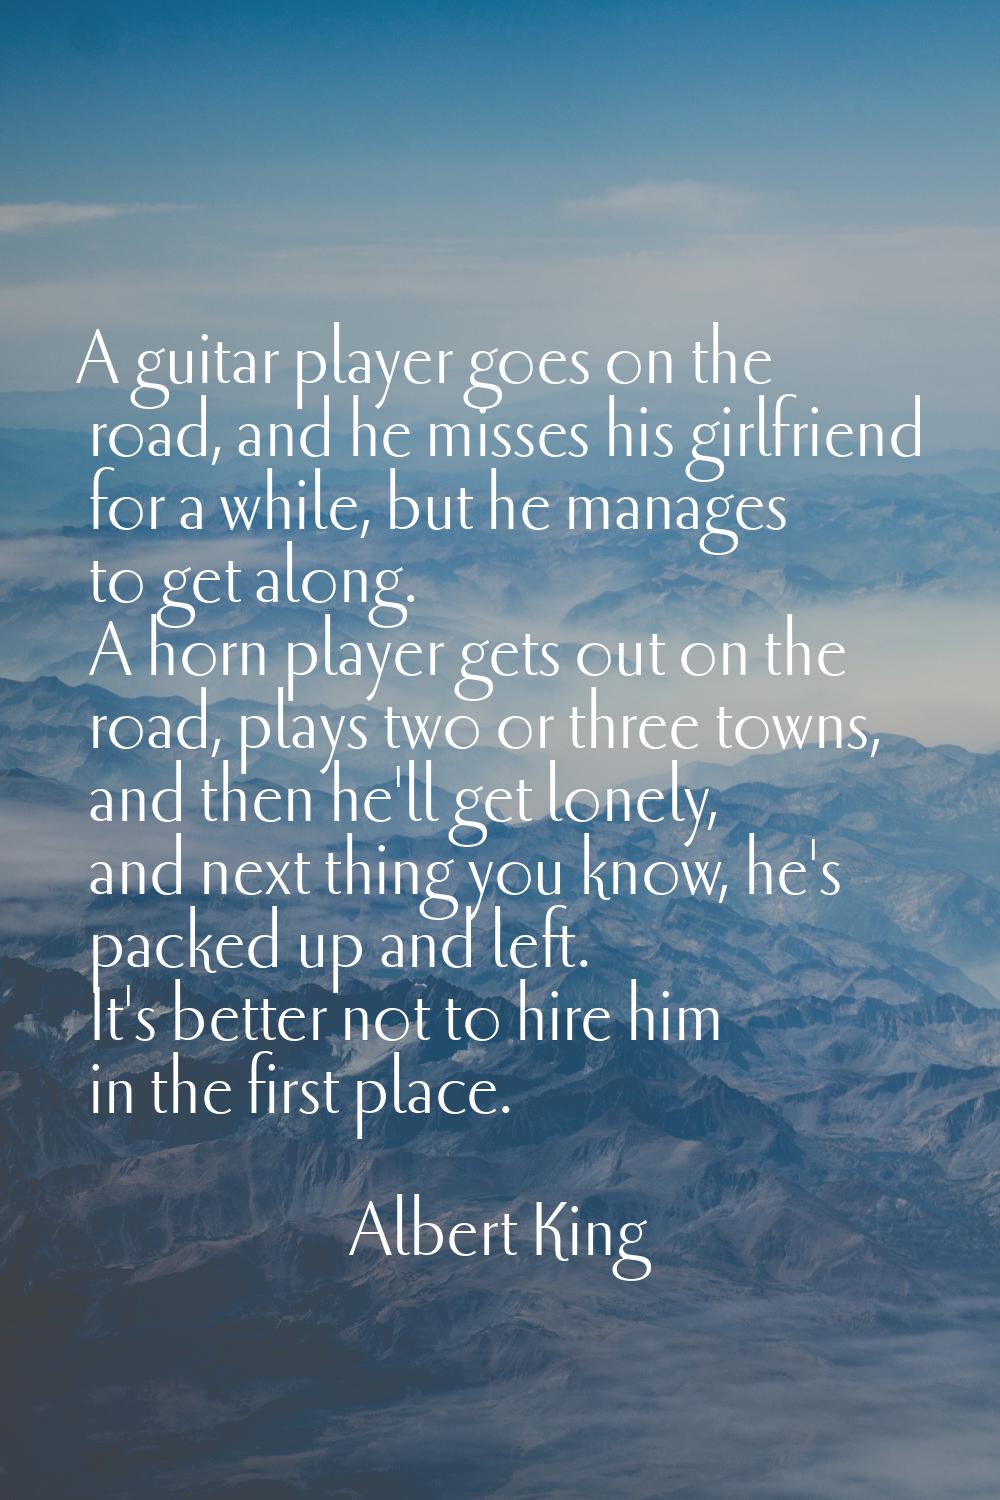 A guitar player goes on the road, and he misses his girlfriend for a while, but he manages to get a